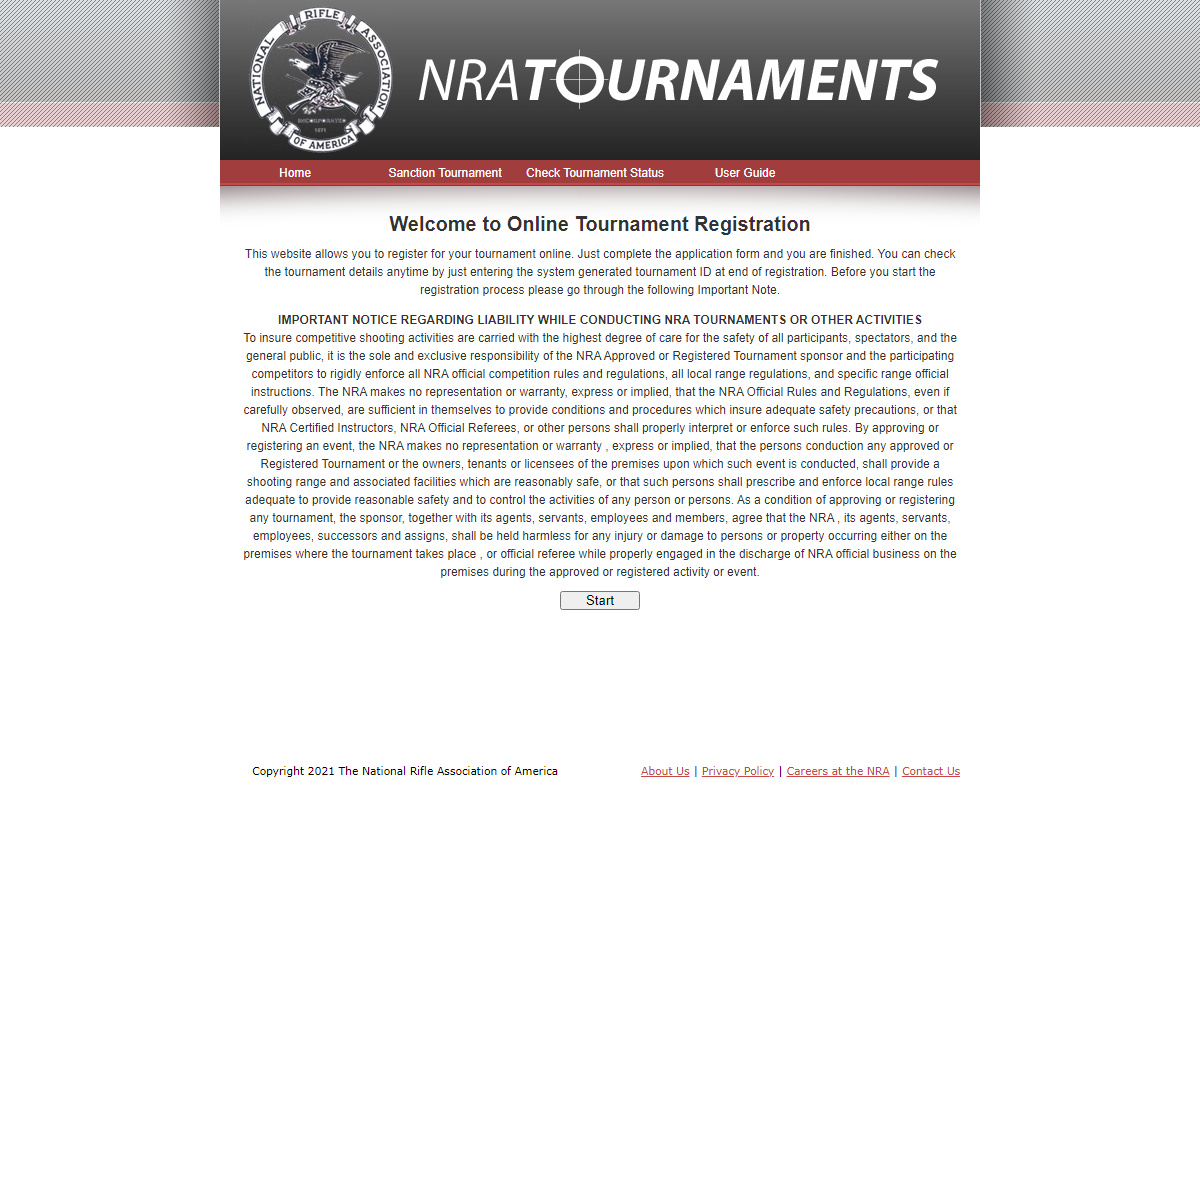 A complete backup of https://tournaments.nra.org/